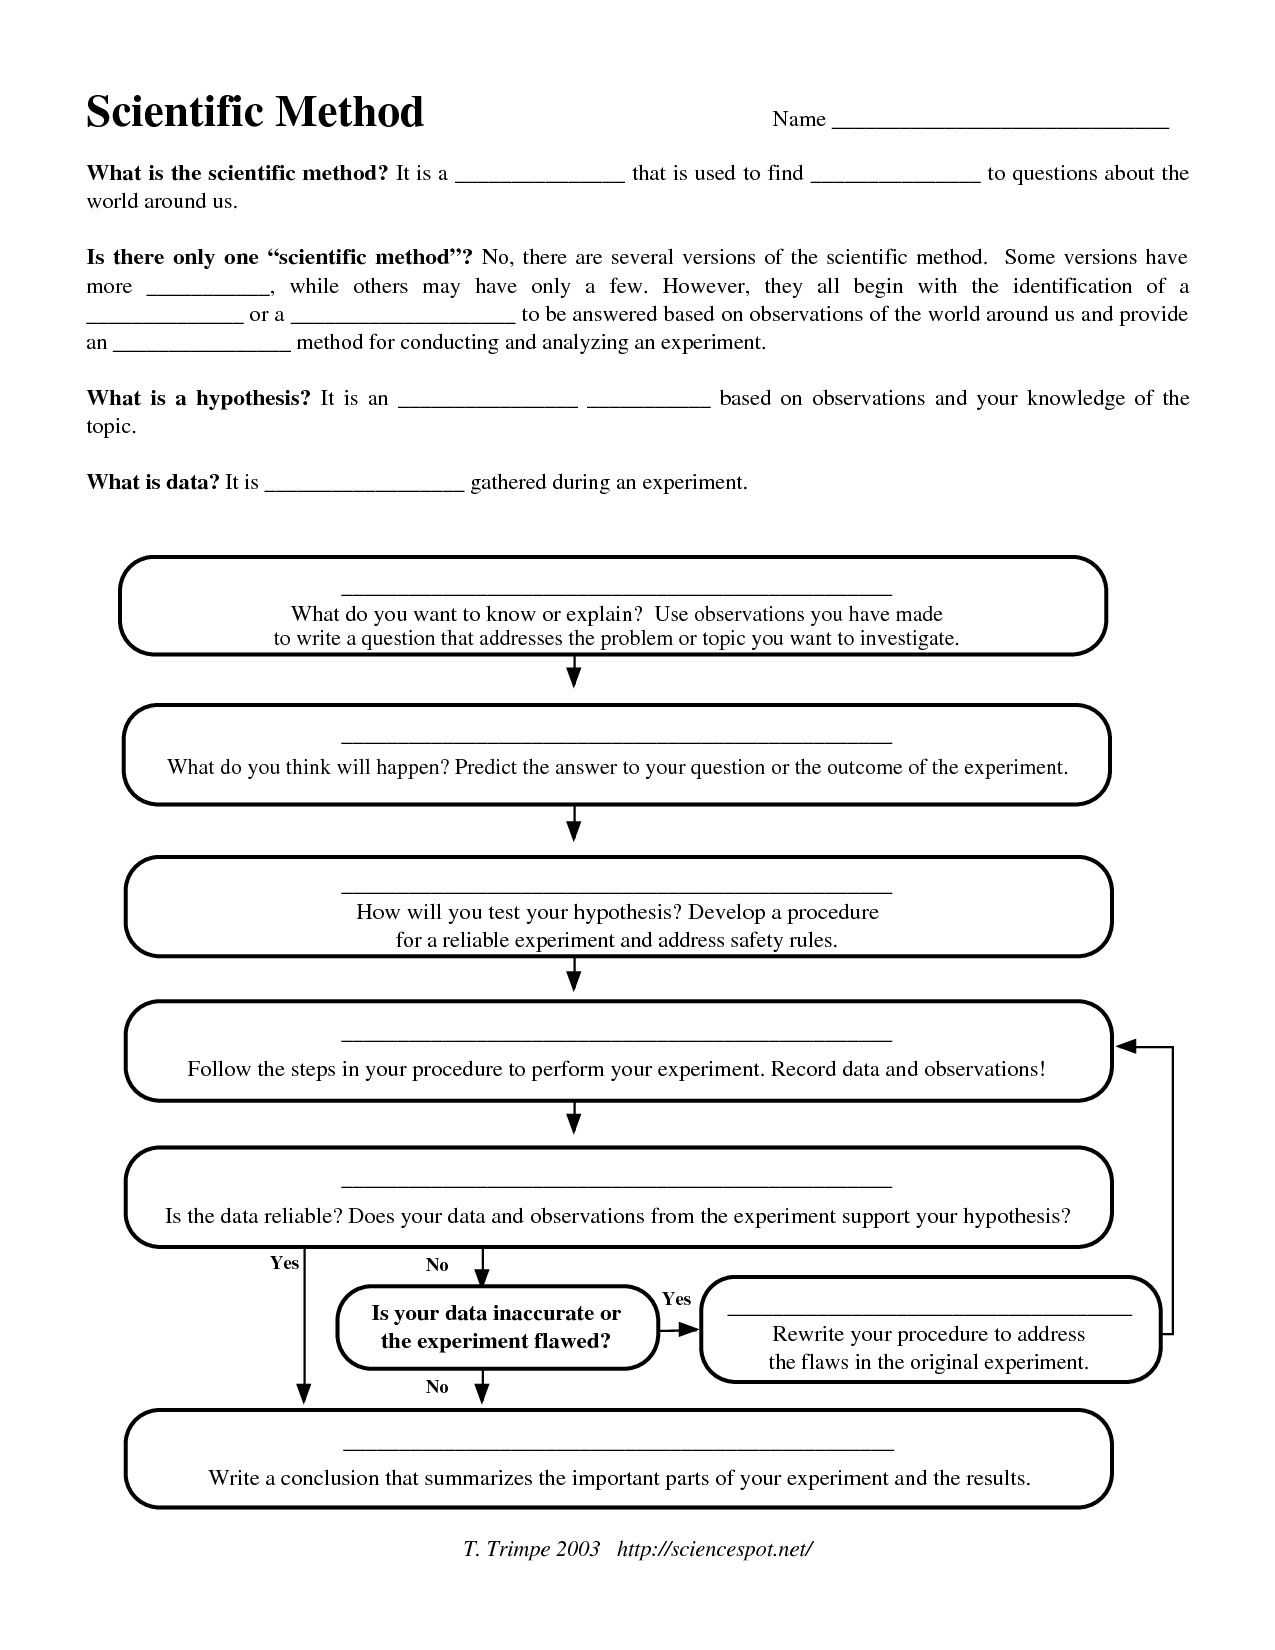 Scientific Inquiry Worksheet Answers with Printables the Scientific Method Worksheets Printables Scientific